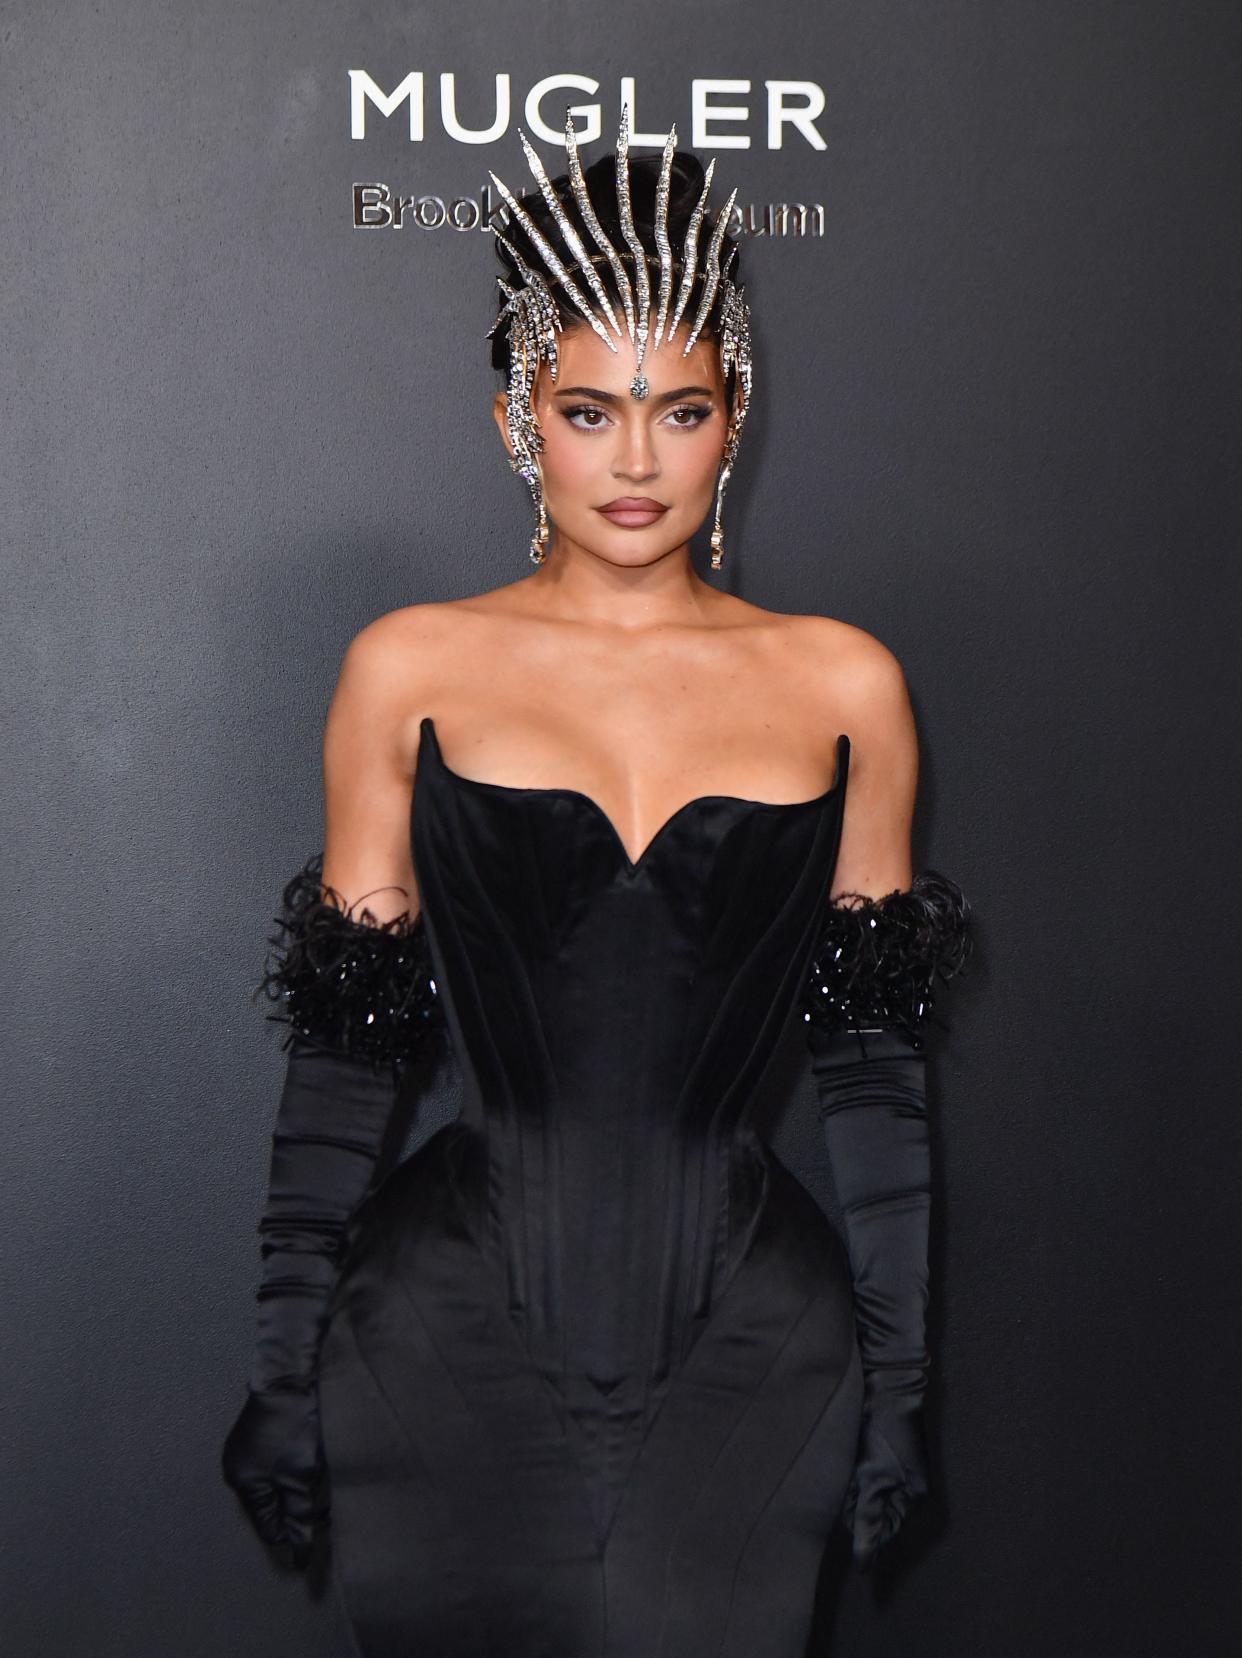 Kylie Jenner arrives to the opening of the Thierry Mugler: Couturissime exhibition at the Brooklyn Museum in the Brooklyn borough of New York City, on November 15, 2022.